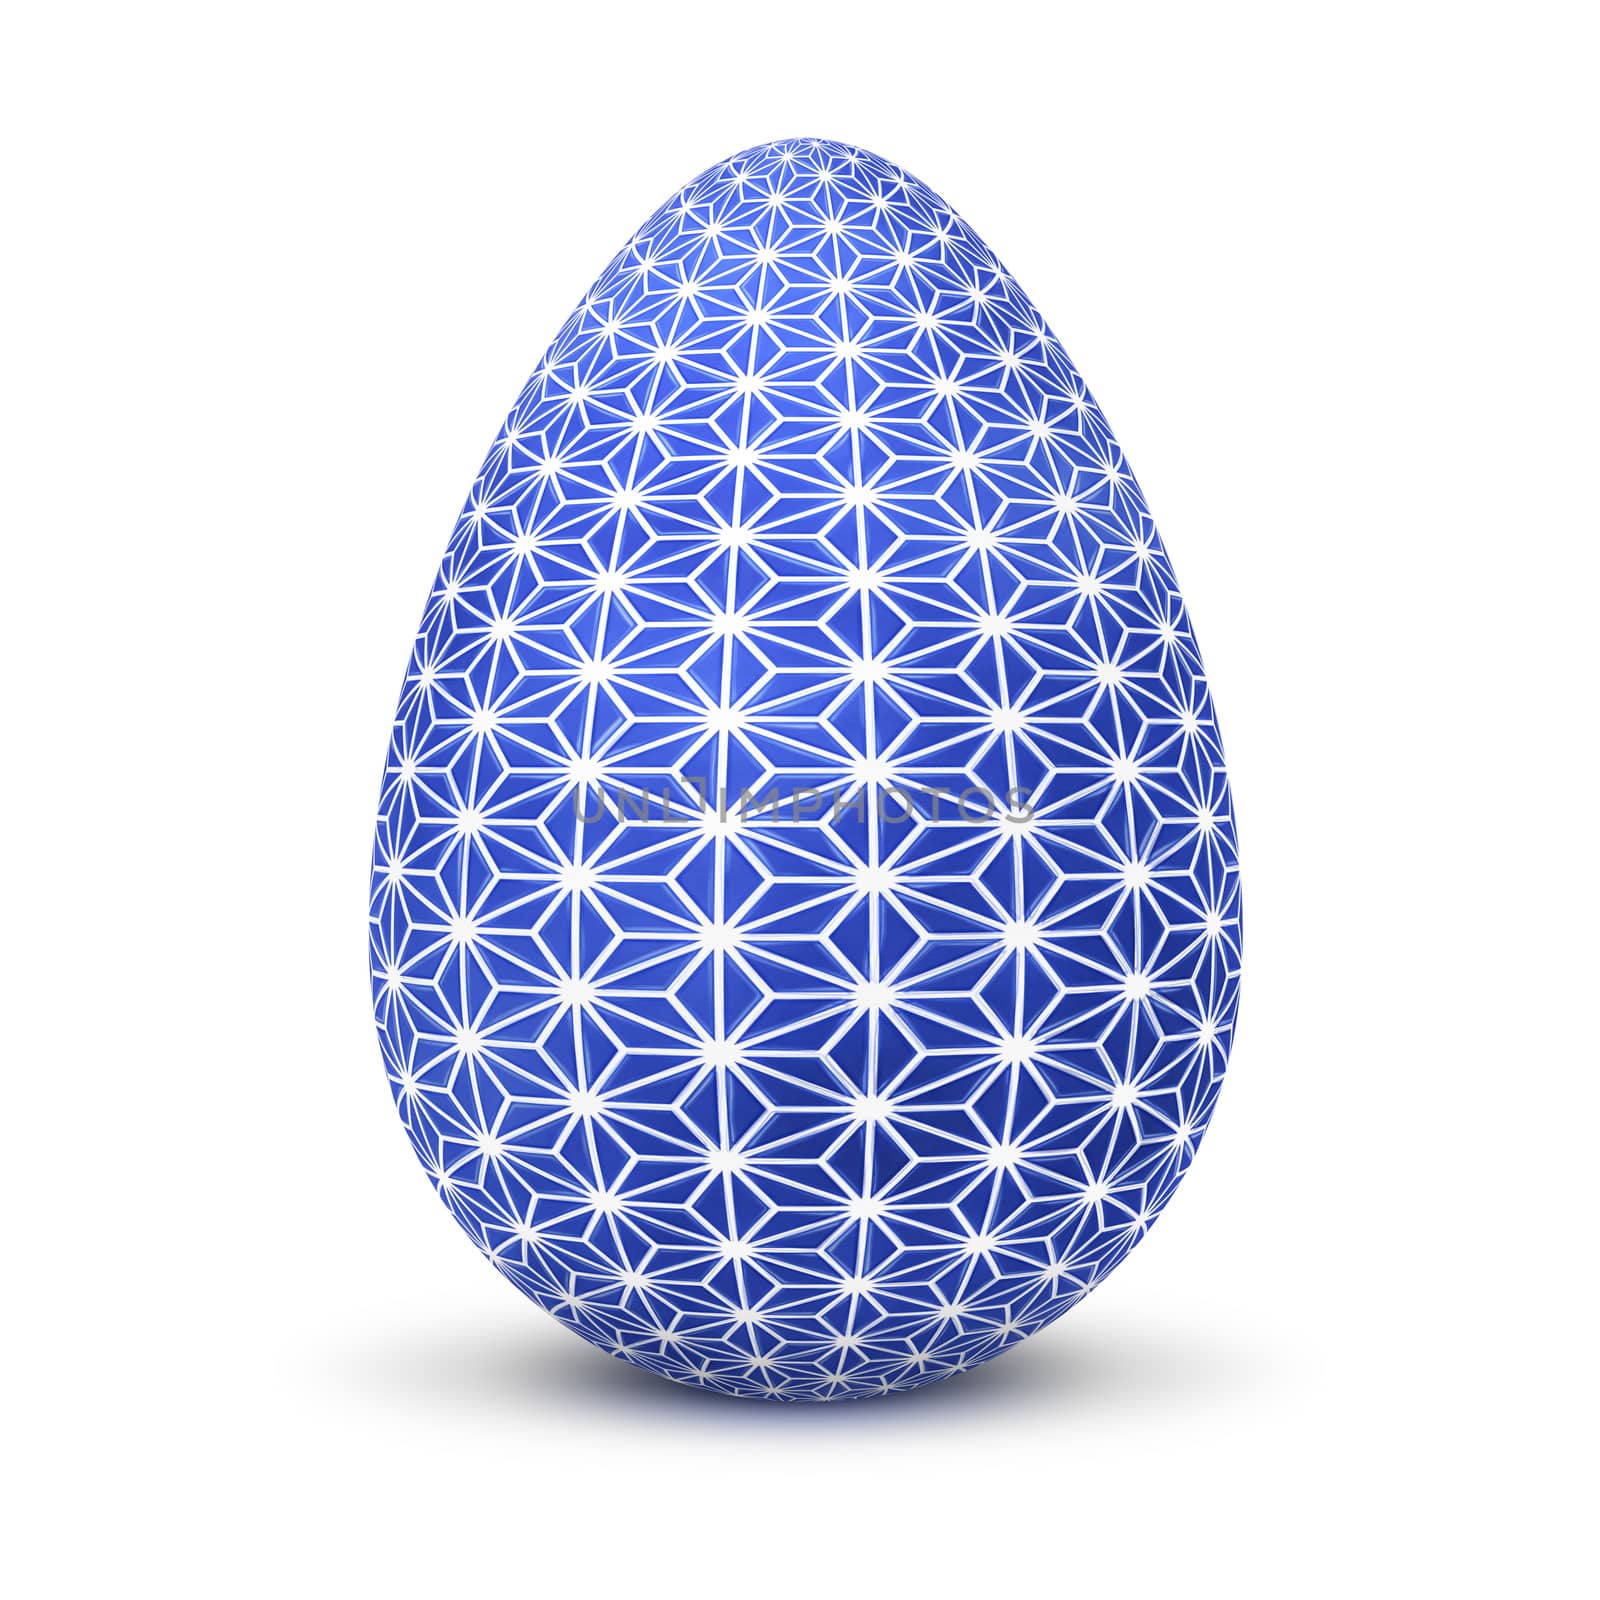 An image of a blue egg on a white background